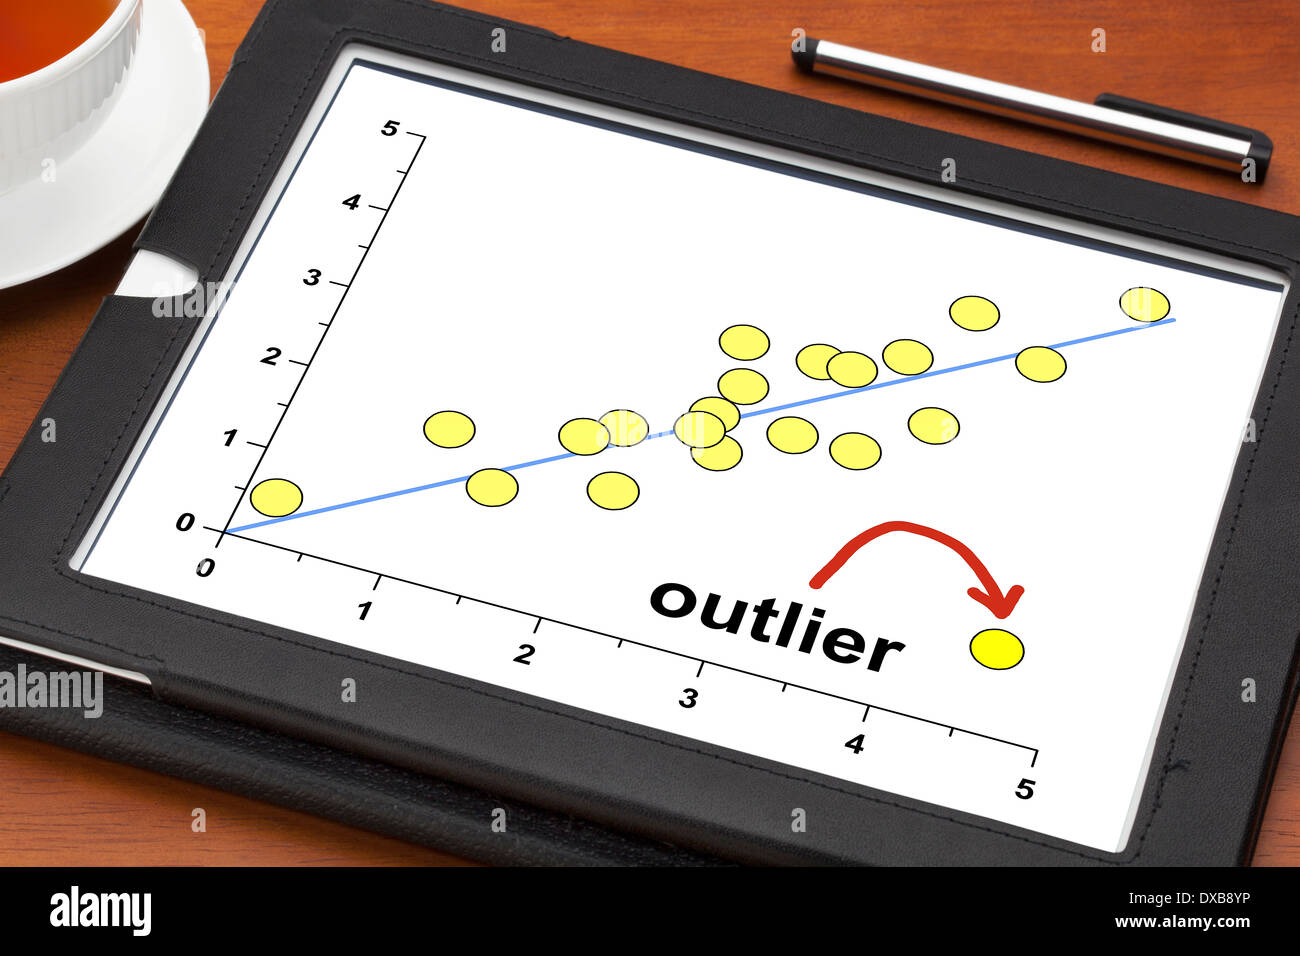 outlier or outsider concept on a digital tablet with a cup of tea Stock Photo